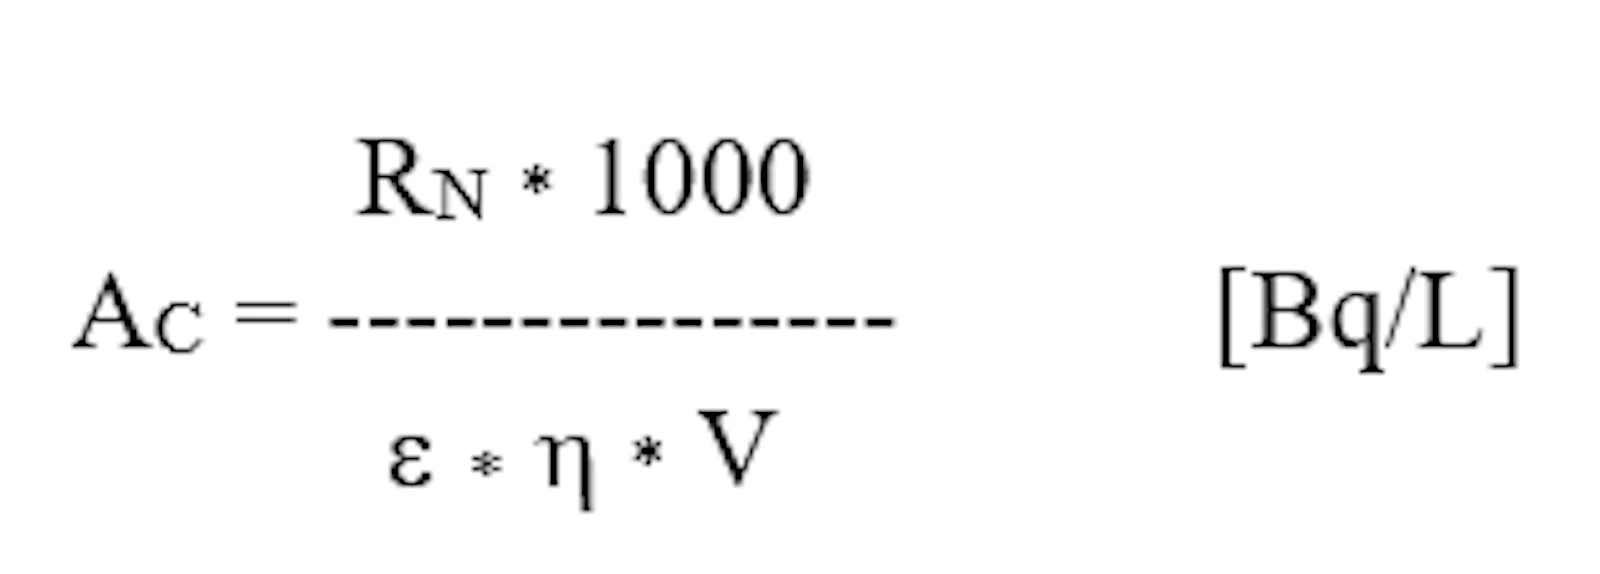 Formula for calculating the activity of 210Pb.